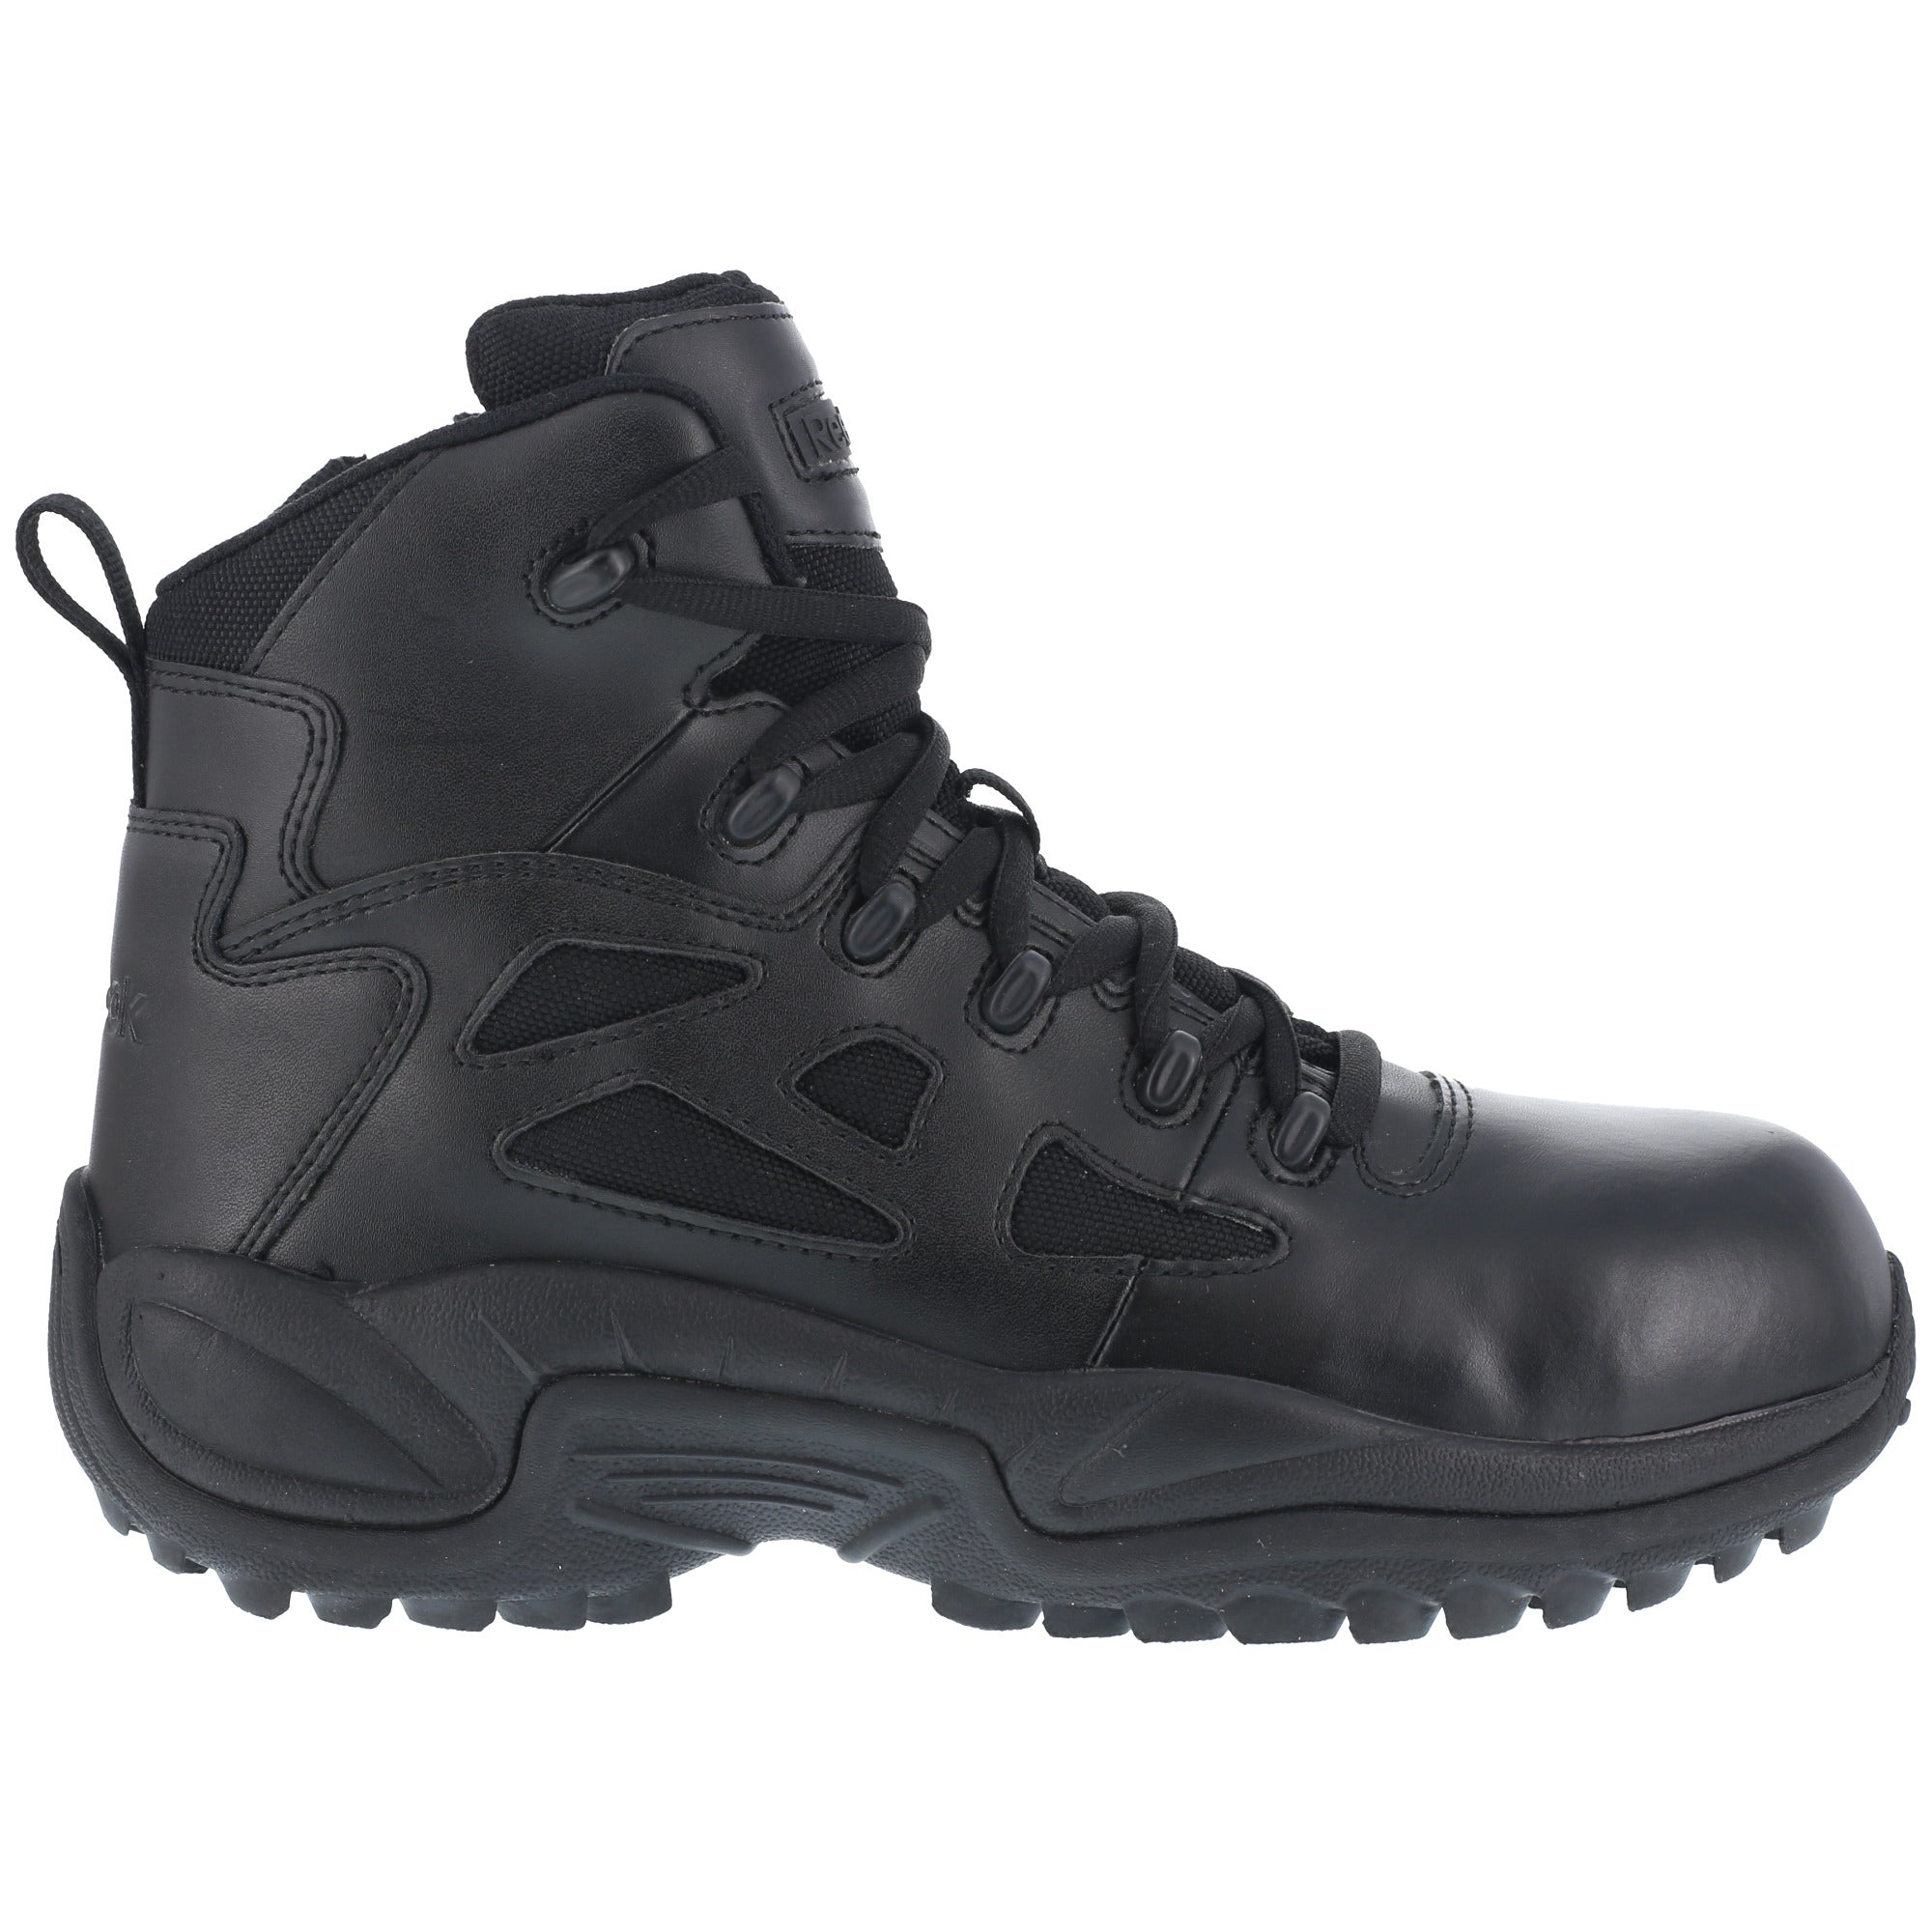 Reebok Womens Black Leather Tactical Boots Rapid Response RB Comp – The Western Company